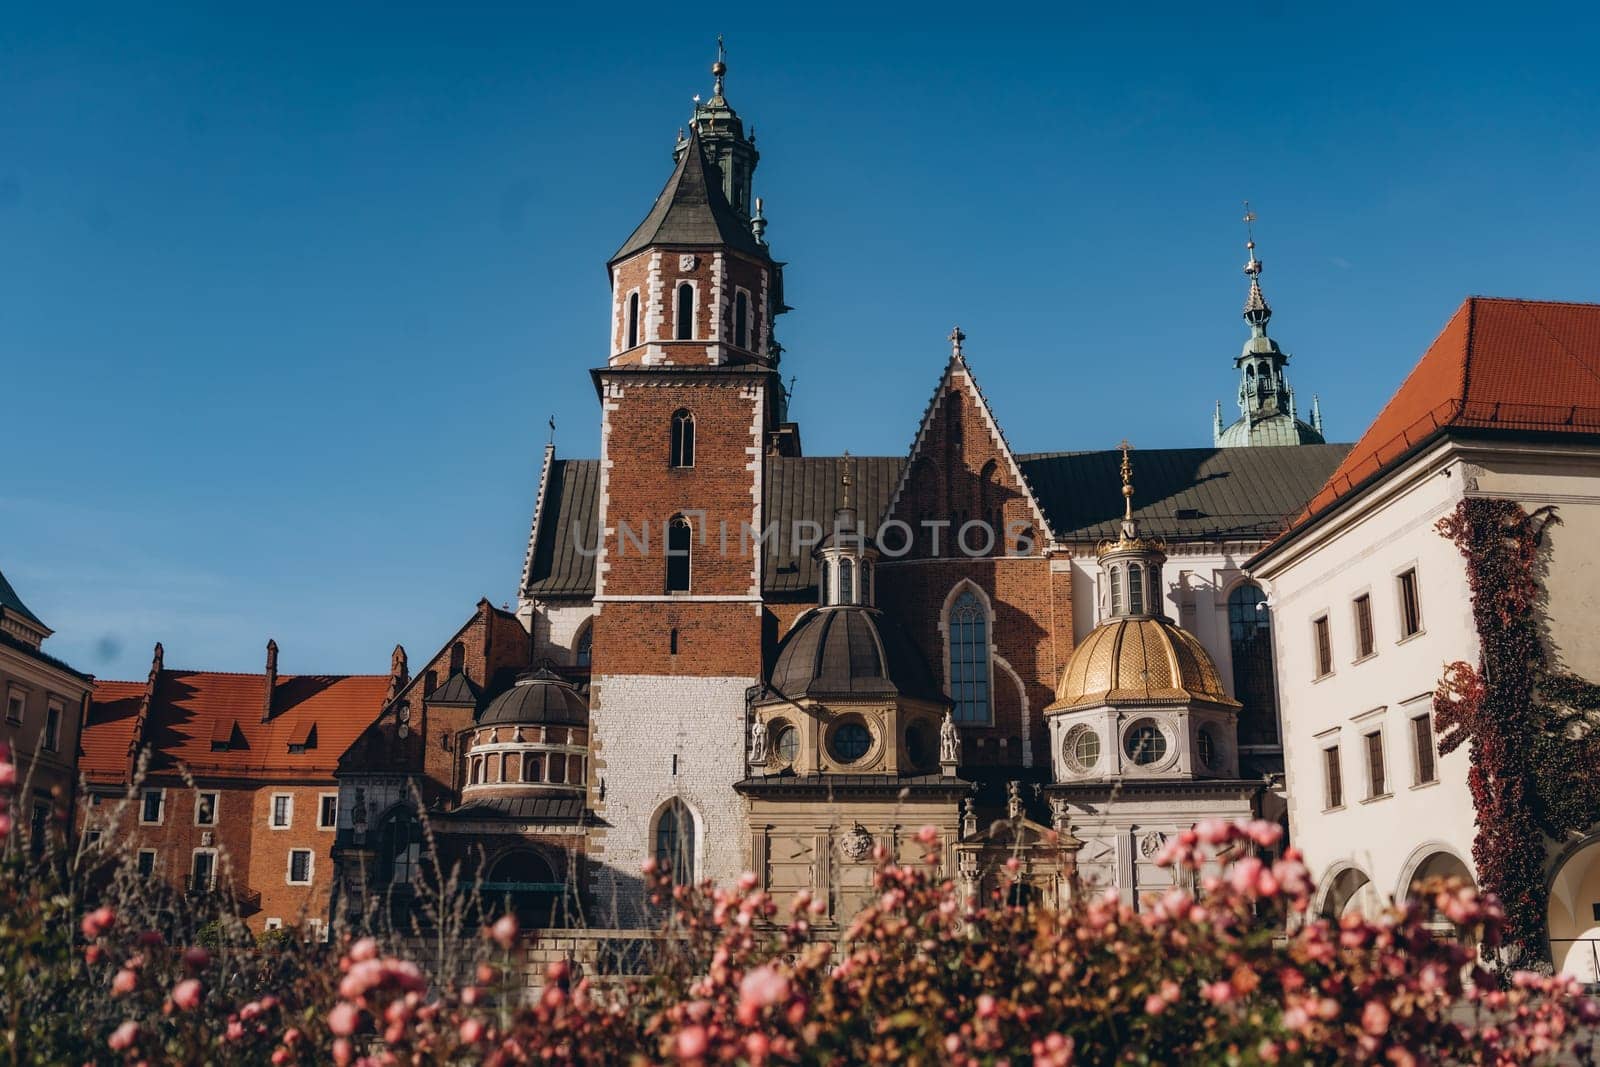 Autumn view of Wawel Royal Castle complex in Krakow, Poland by Popov